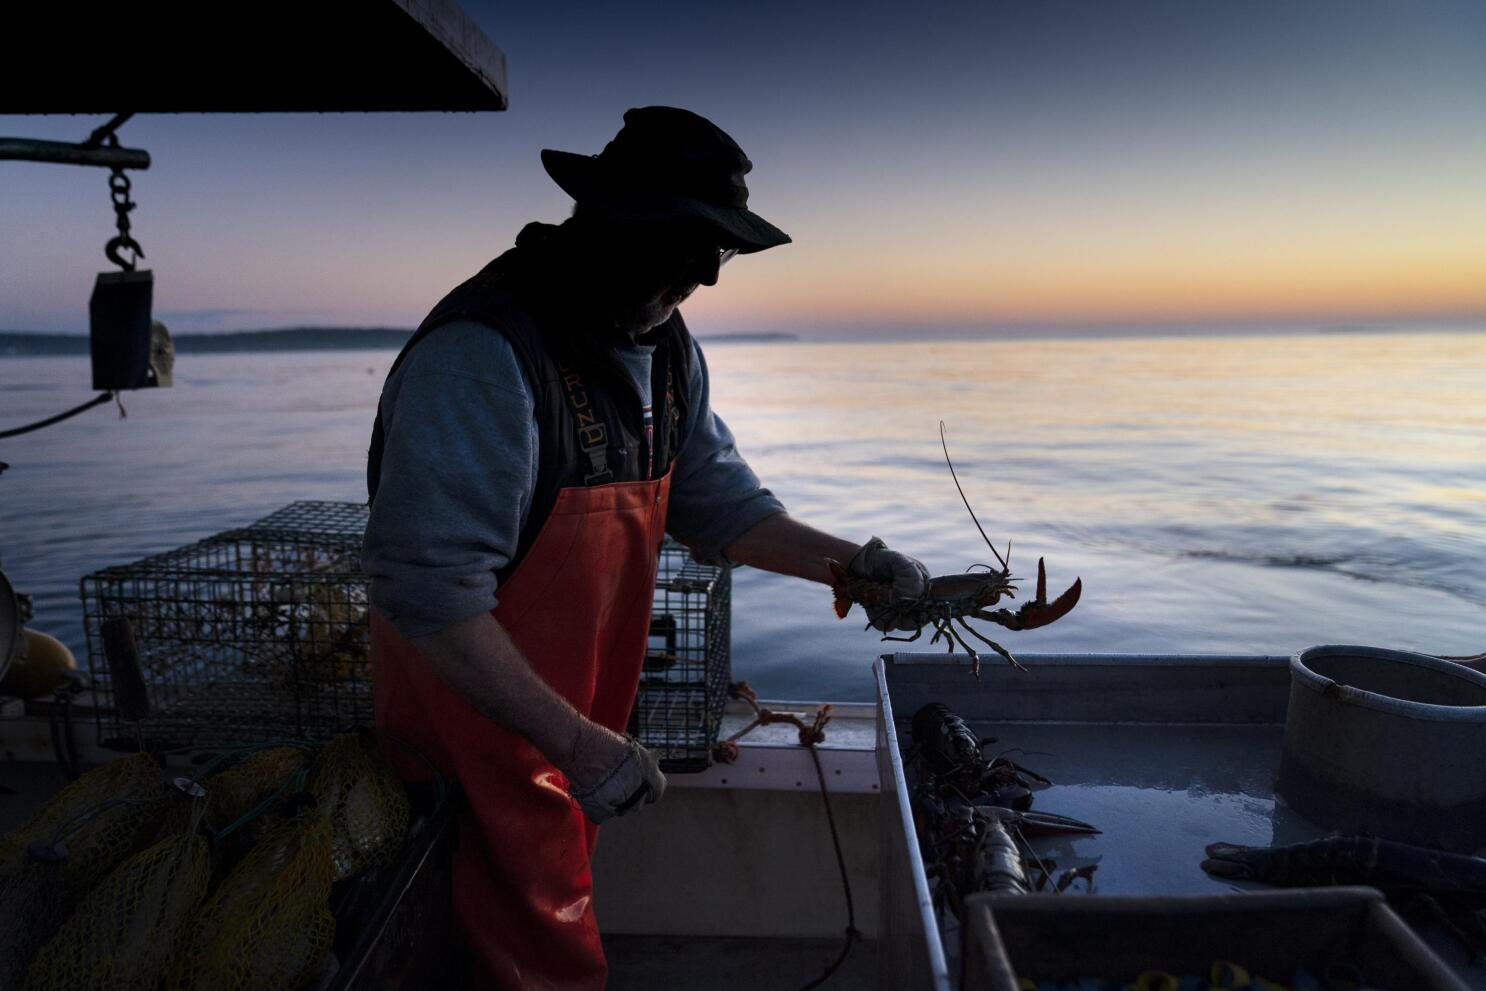 Lobster prices sky high due to heavy demand, slower season | AP News